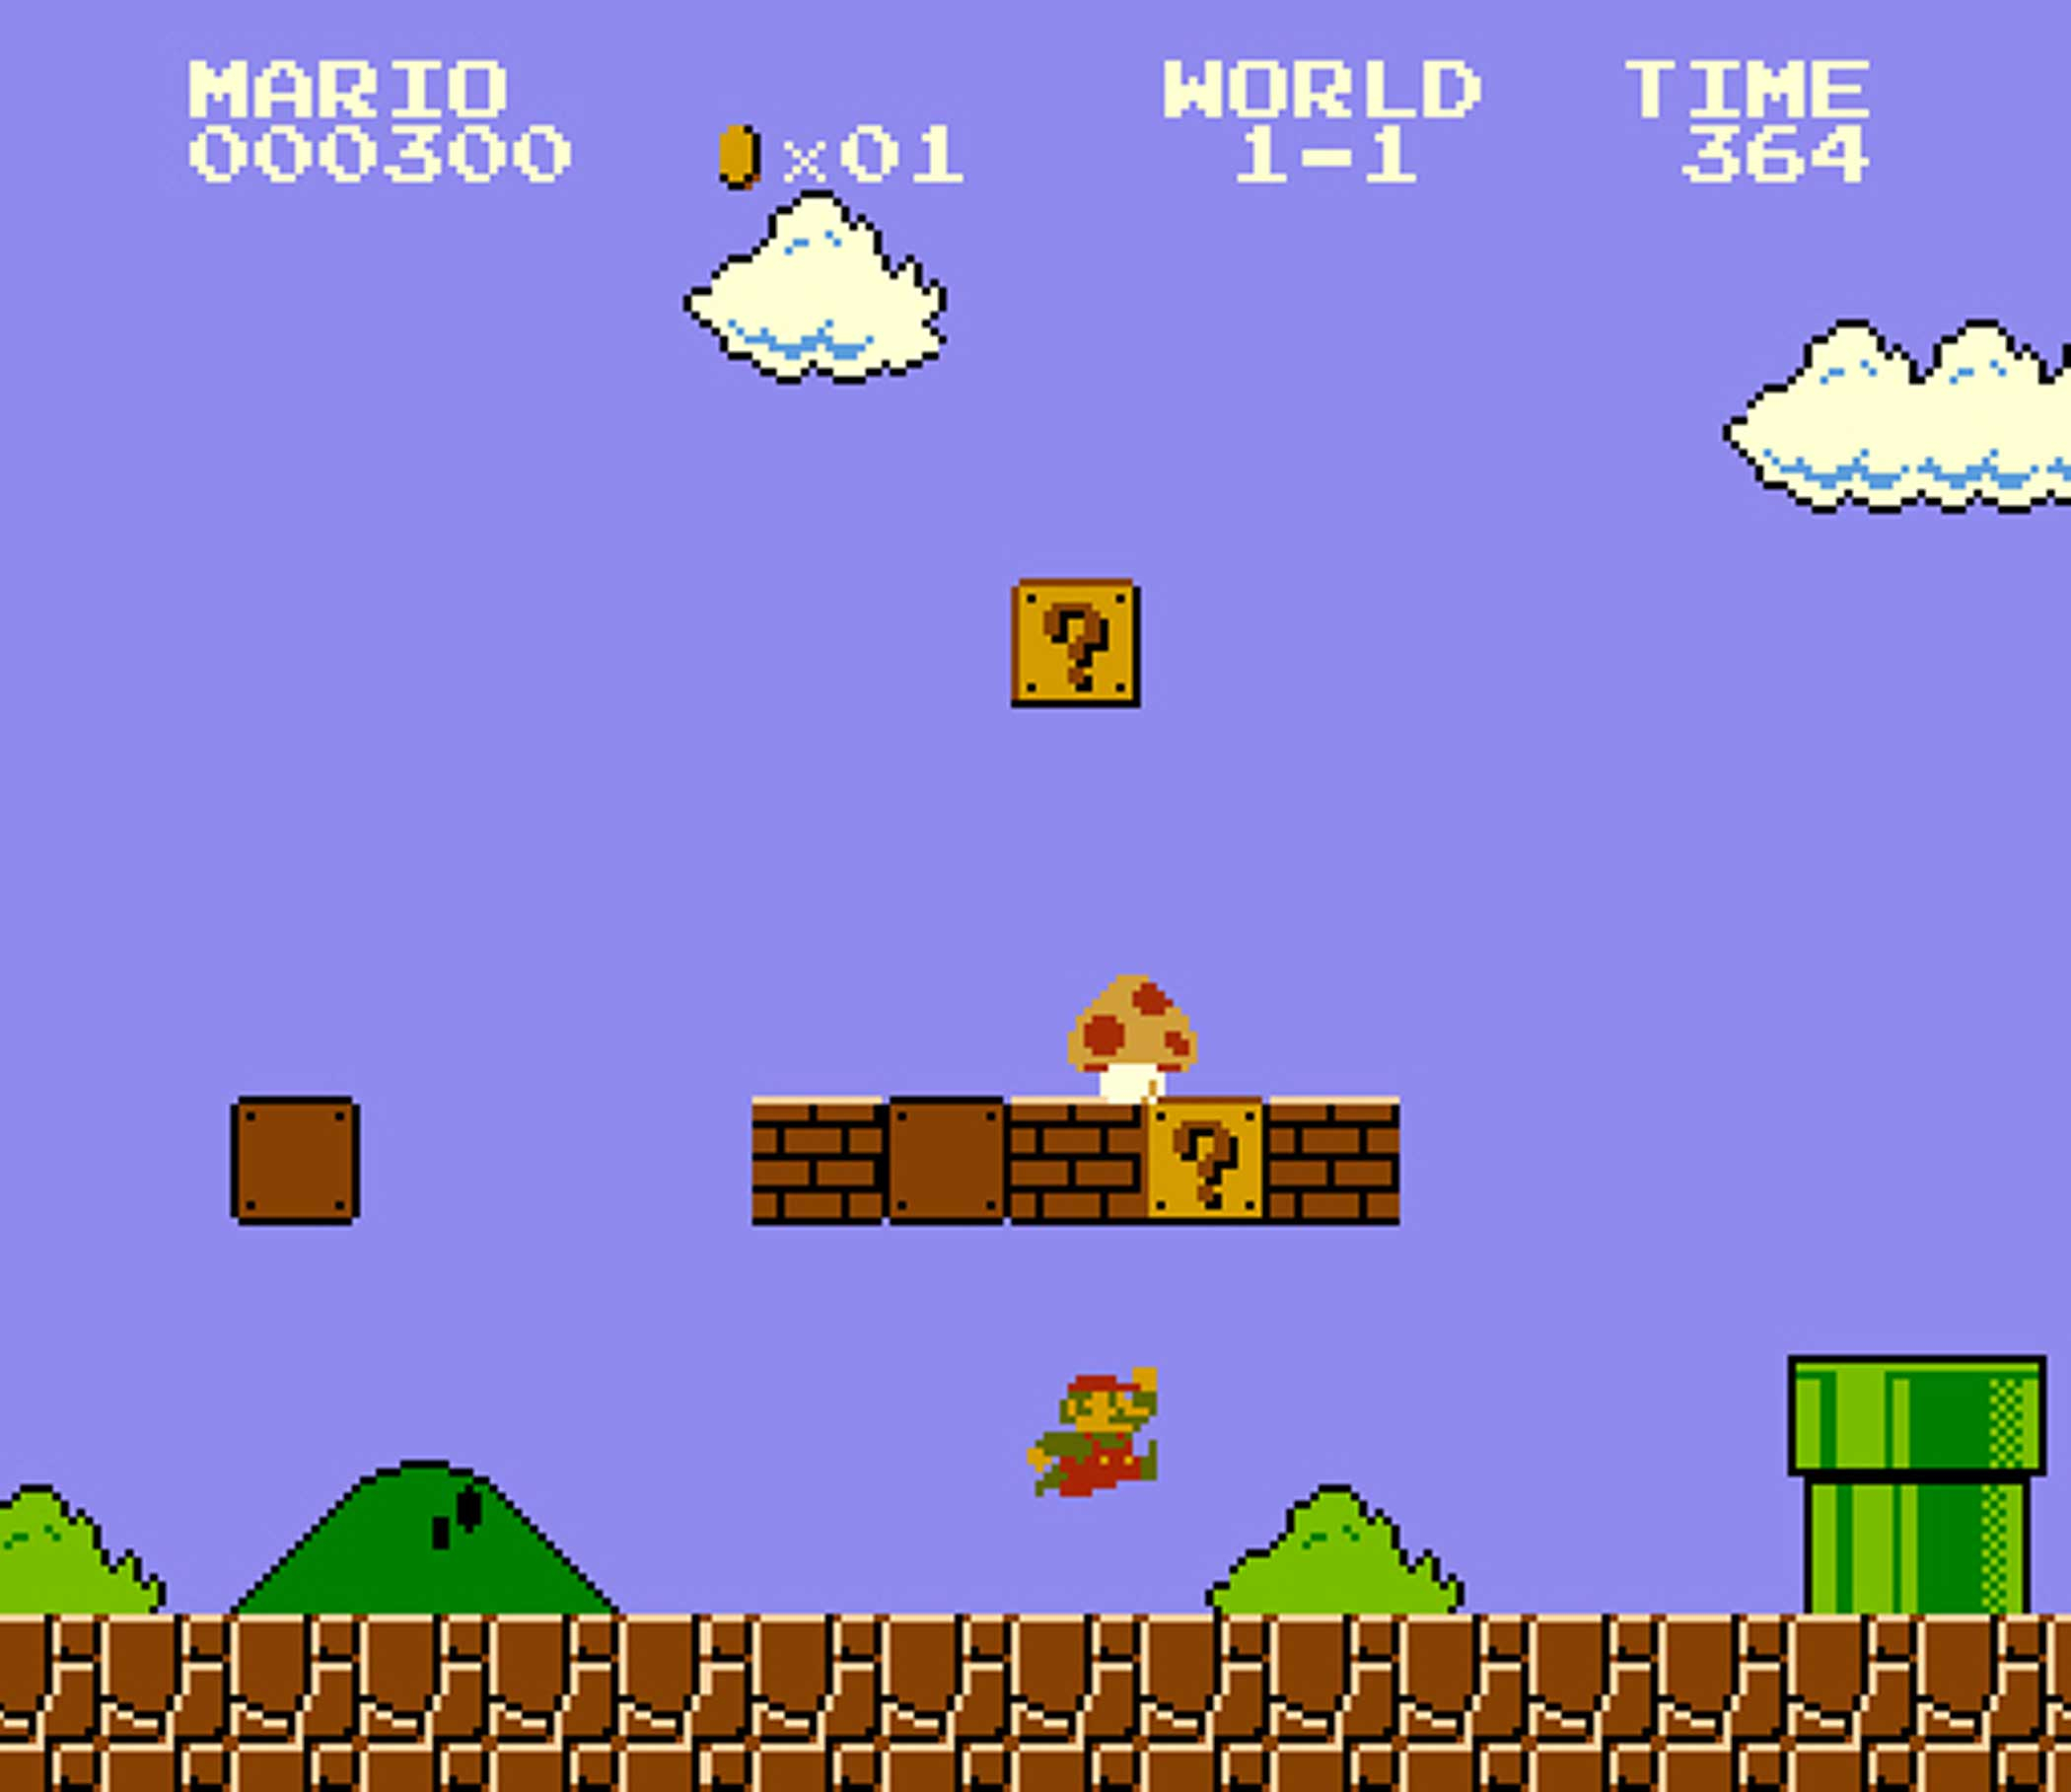 It has been almost 40 years since the first Super Mario game has been released